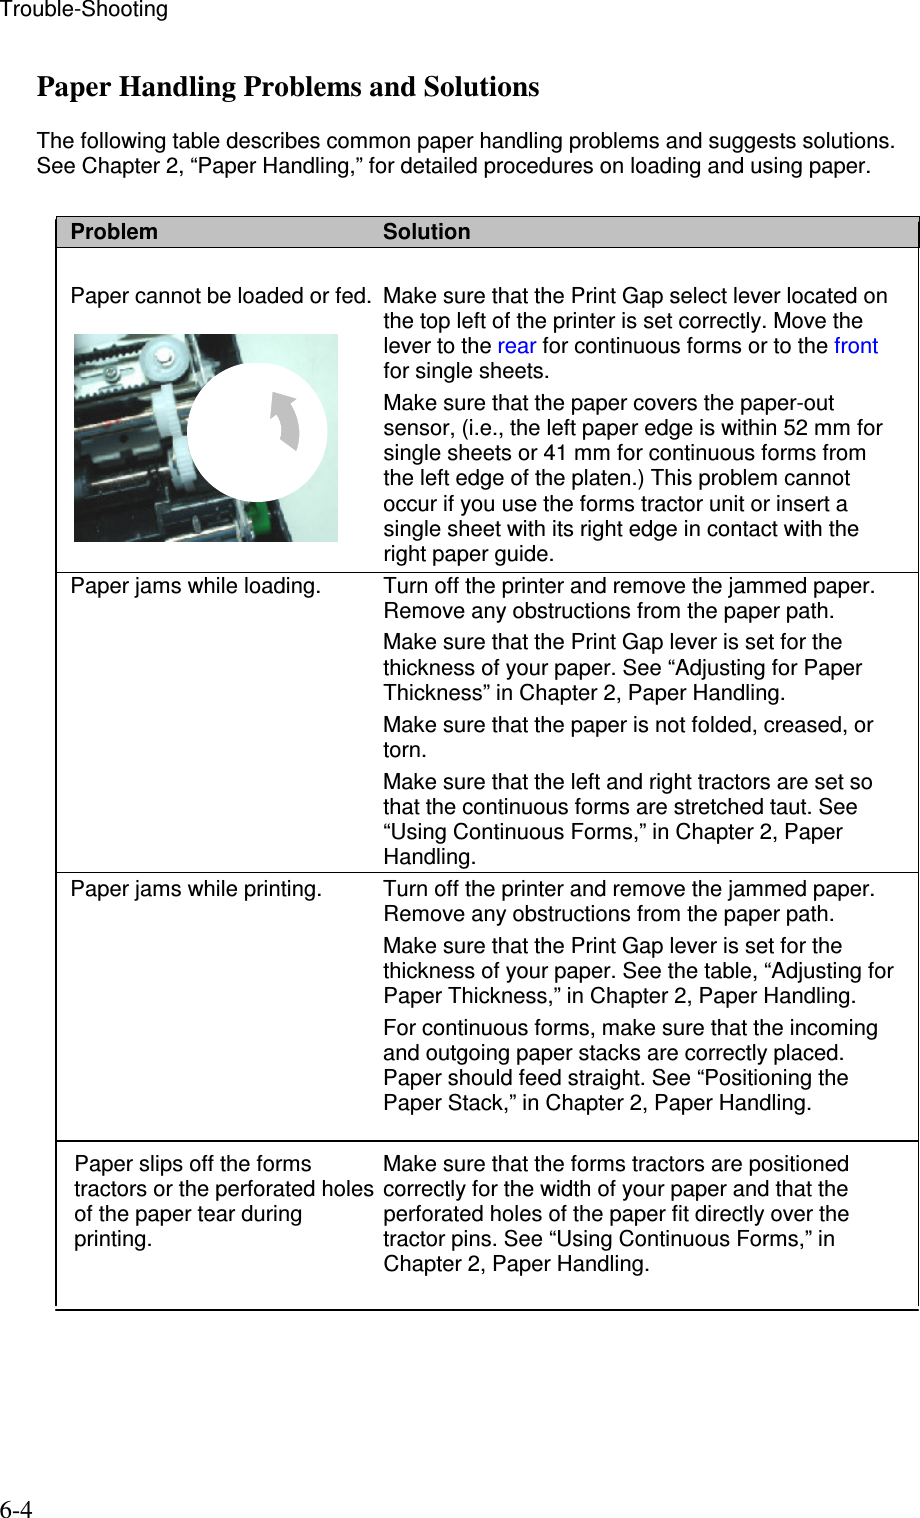 Trouble-Shooting  6-4 Paper Handling Problems and Solutions  The following table describes common paper handling problems and suggests solutions. See Chapter 2, “Paper Handling,” for detailed procedures on loading and using paper.  Problem  Solution  Paper cannot be loaded or fed.  Make sure that the Print Gap select lever located on the top left of the printer is set correctly. Move the lever to the rear for continuous forms or to the front for single sheets.   Make sure that the paper covers the paper-out sensor, (i.e., the left paper edge is within 52 mm for single sheets or 41 mm for continuous forms from the left edge of the platen.) This problem cannot occur if you use the forms tractor unit or insert a single sheet with its right edge in contact with the right paper guide. Paper jams while loading.  Turn off the printer and remove the jammed paper. Remove any obstructions from the paper path.   Make sure that the Print Gap lever is set for the thickness of your paper. See “Adjusting for Paper Thickness” in Chapter 2, Paper Handling.   Make sure that the paper is not folded, creased, or torn.   Make sure that the left and right tractors are set so that the continuous forms are stretched taut. See “Using Continuous Forms,” in Chapter 2, Paper Handling. Paper jams while printing.  Turn off the printer and remove the jammed paper.  Remove any obstructions from the paper path.   Make sure that the Print Gap lever is set for the thickness of your paper. See the table, “Adjusting for Paper Thickness,” in Chapter 2, Paper Handling.   For continuous forms, make sure that the incoming and outgoing paper stacks are correctly placed. Paper should feed straight. See “Positioning the Paper Stack,” in Chapter 2, Paper Handling.   Make sure that the forms tractors are positioned correctly for the width of your paper and that the perforated holes of the paper fit directly over the tractor pins. See “Using Continuous Forms,” in Chapter 2, Paper Handling.Paper slips off the forms tractors or the perforated holes of the paper tear during printing. 